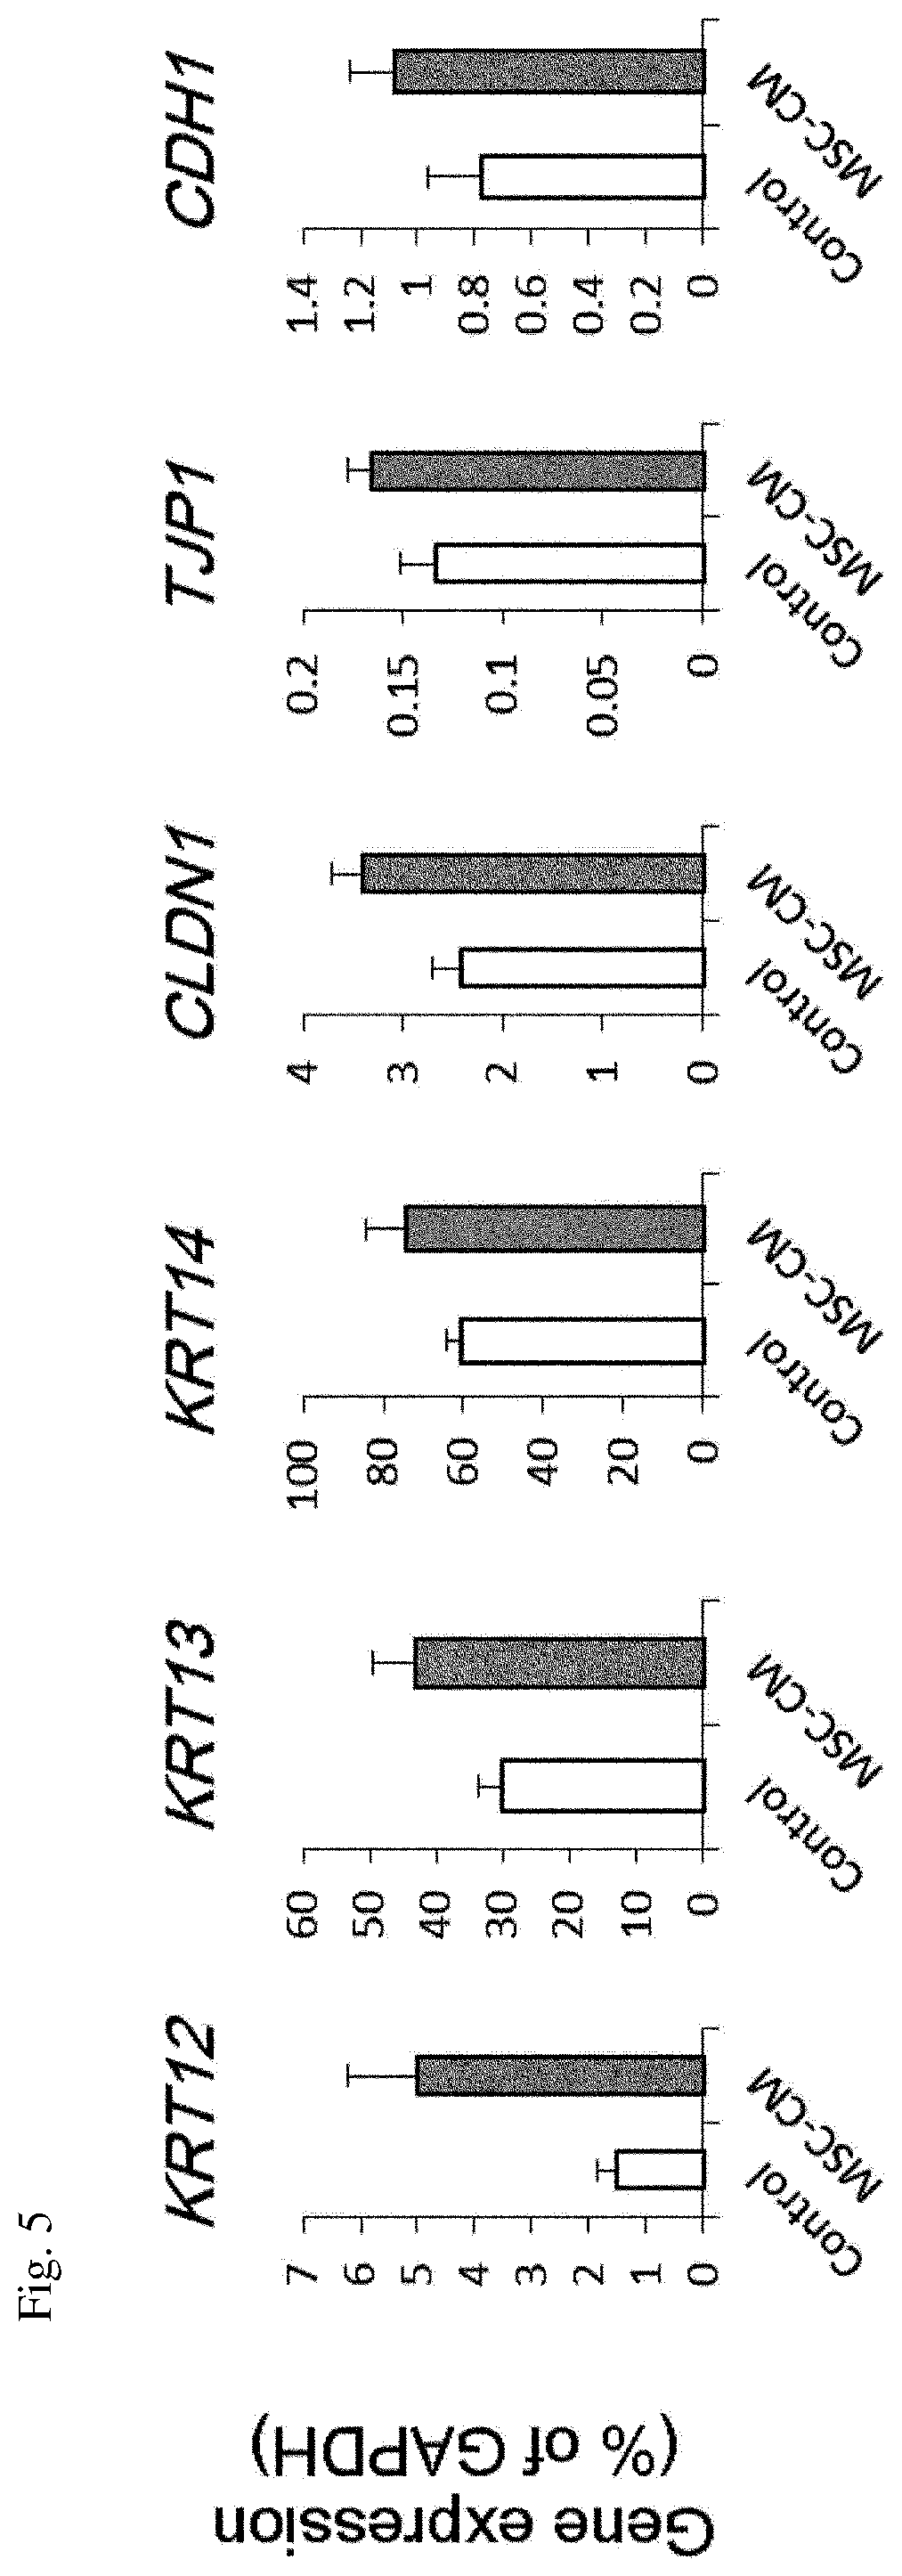 Stratified squamous epithelial cell normal differentiation and maturation promoting agent, epithelial disease therapeutic agent, and stratified squamous epithelial cell normal differentiation and maturation promoting method